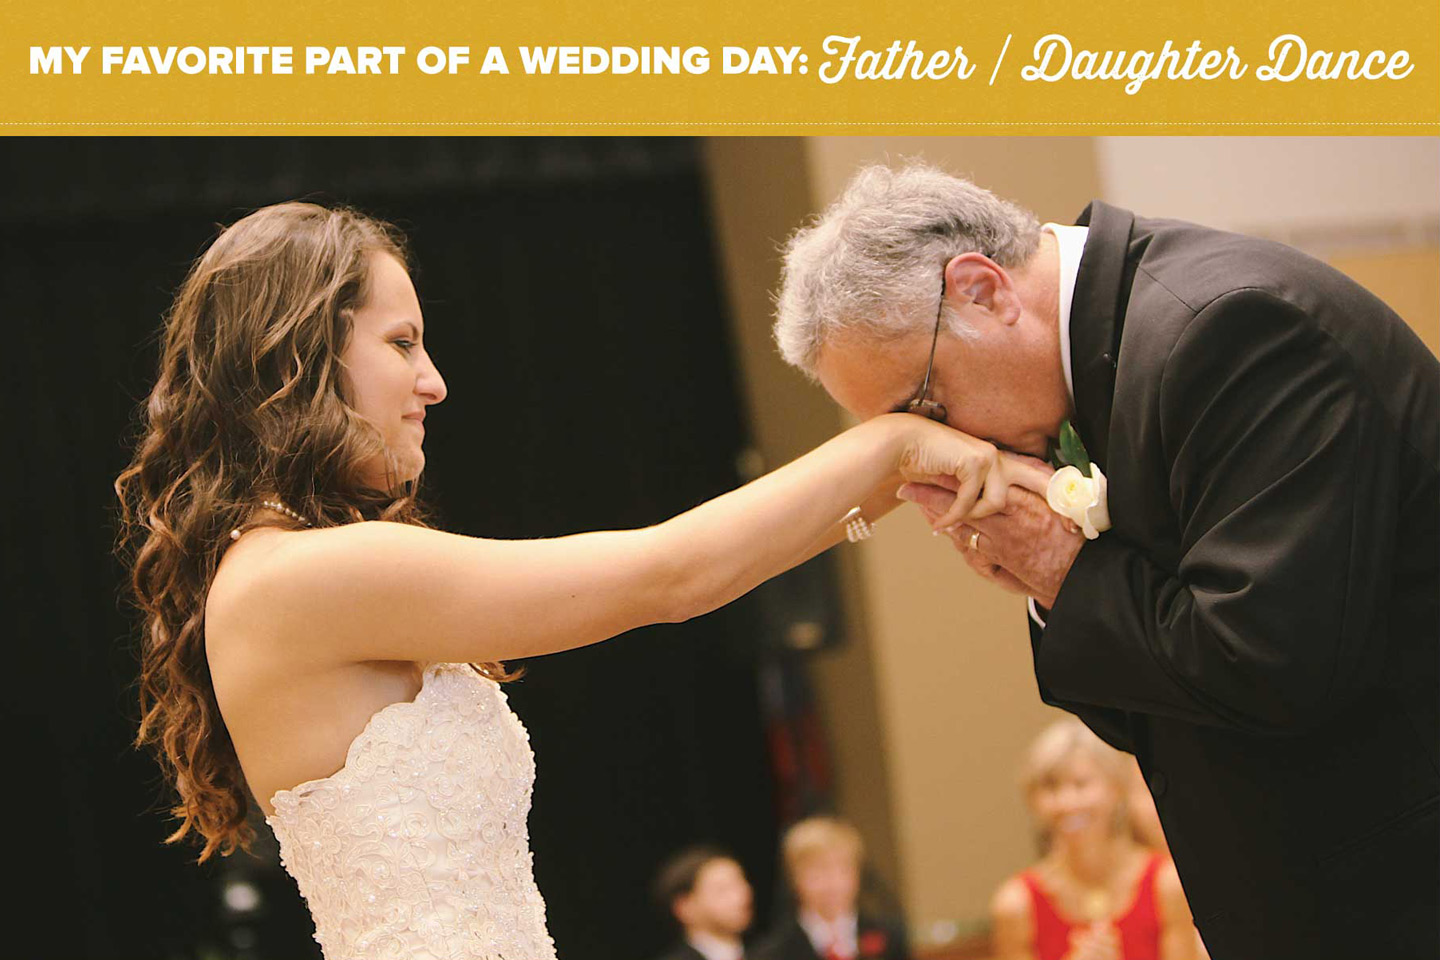 13451my favorite part of a wedding day: father/daughter dance